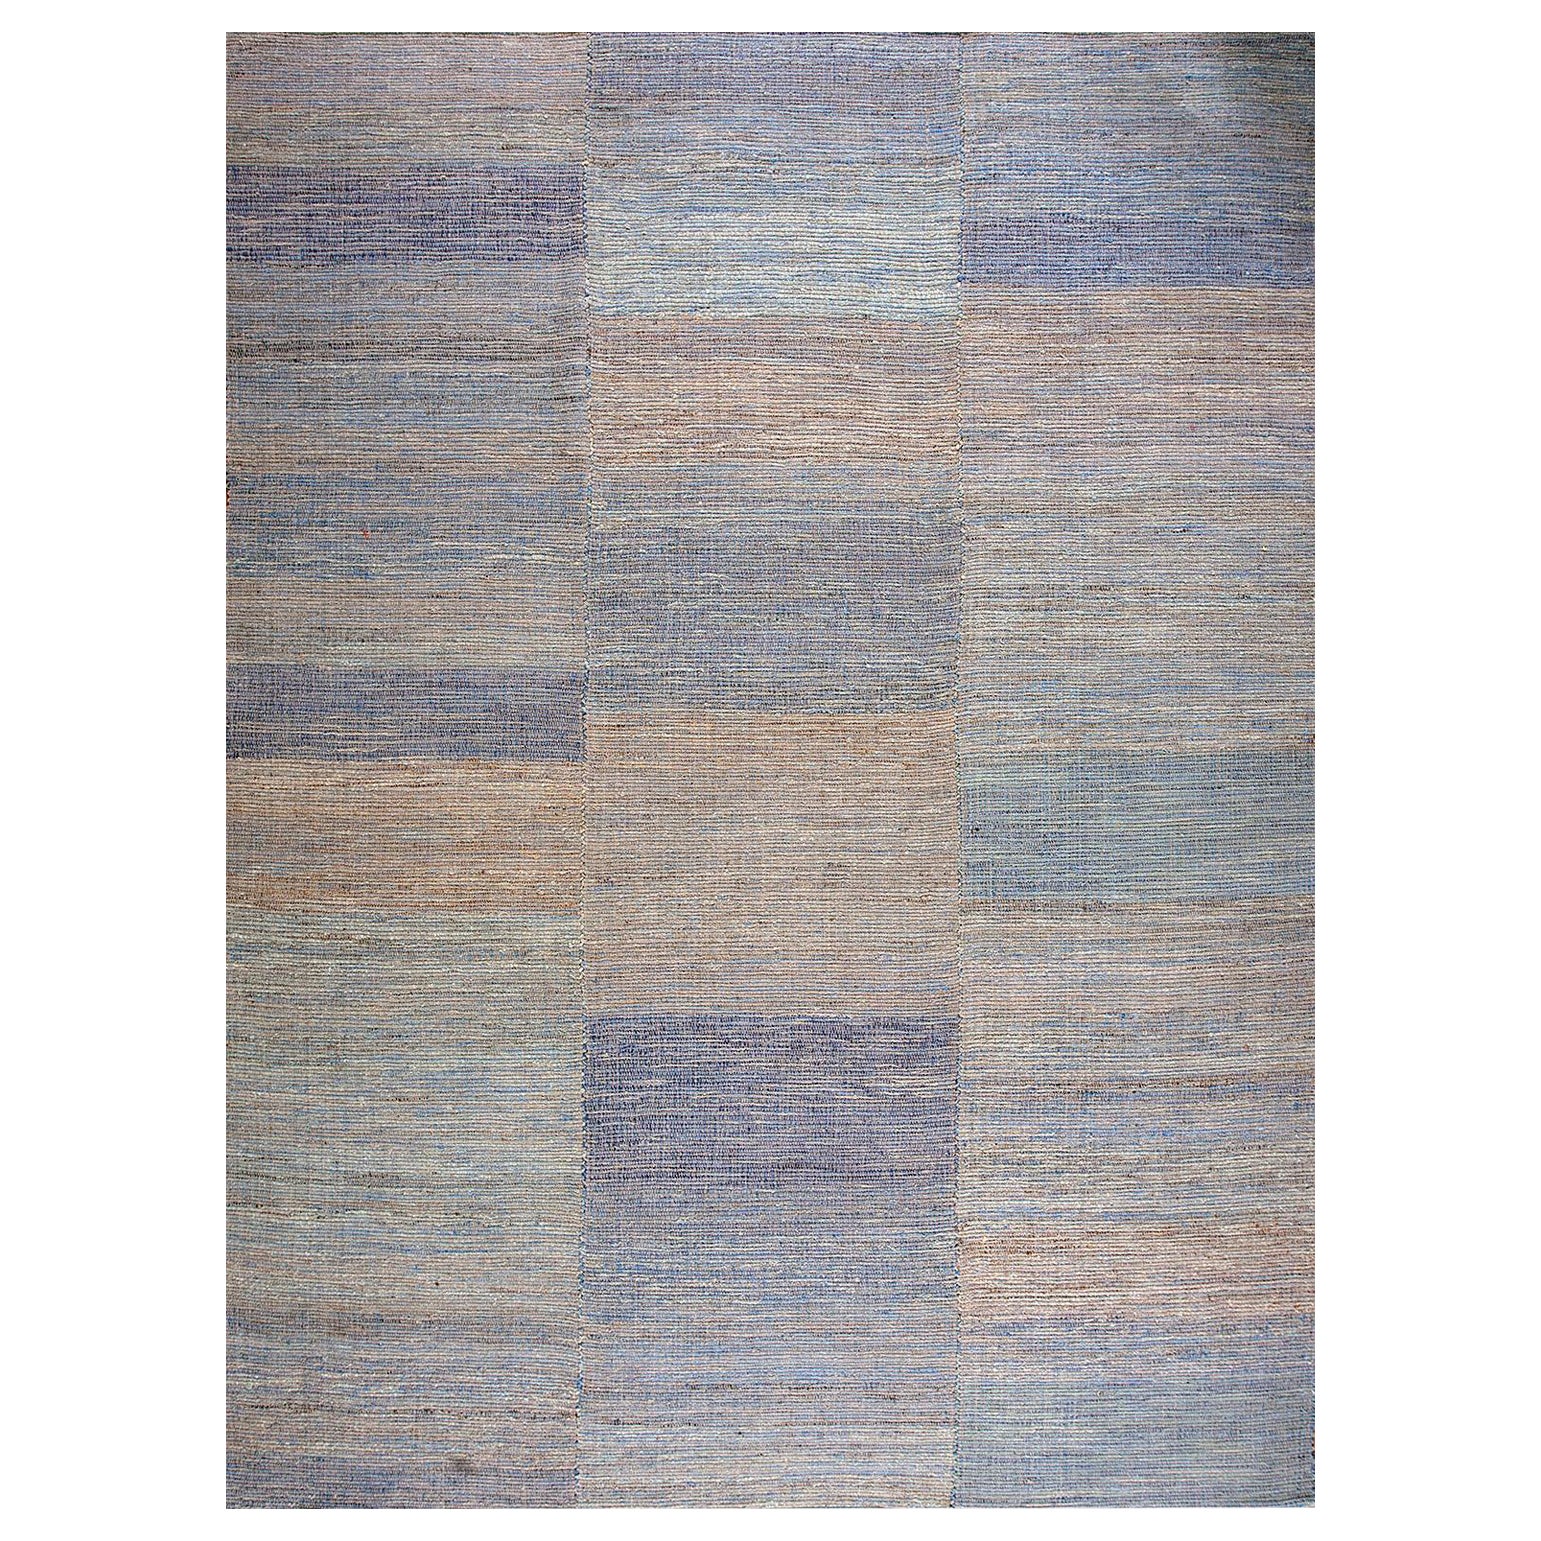 Contemporary Shaker Style Flat Weave Carpet  ( 10' 2" x 14' - 310 x 427 cm ) For Sale